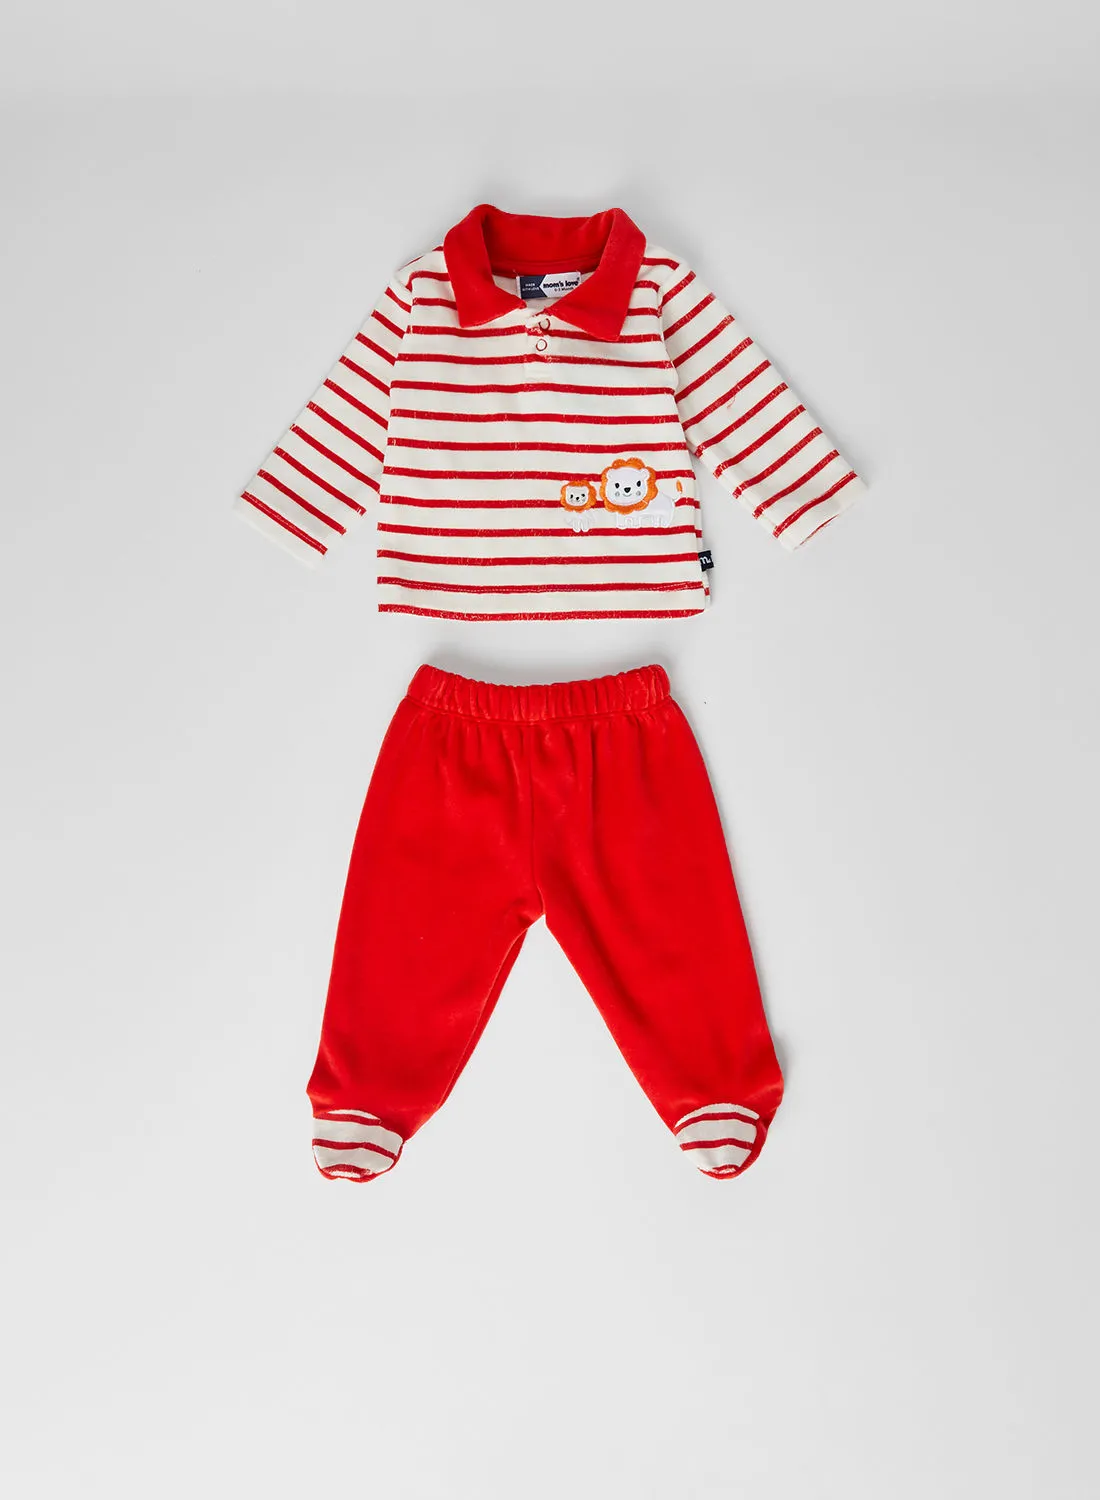 Moms Love Baby Boys Striped Pants Set Red